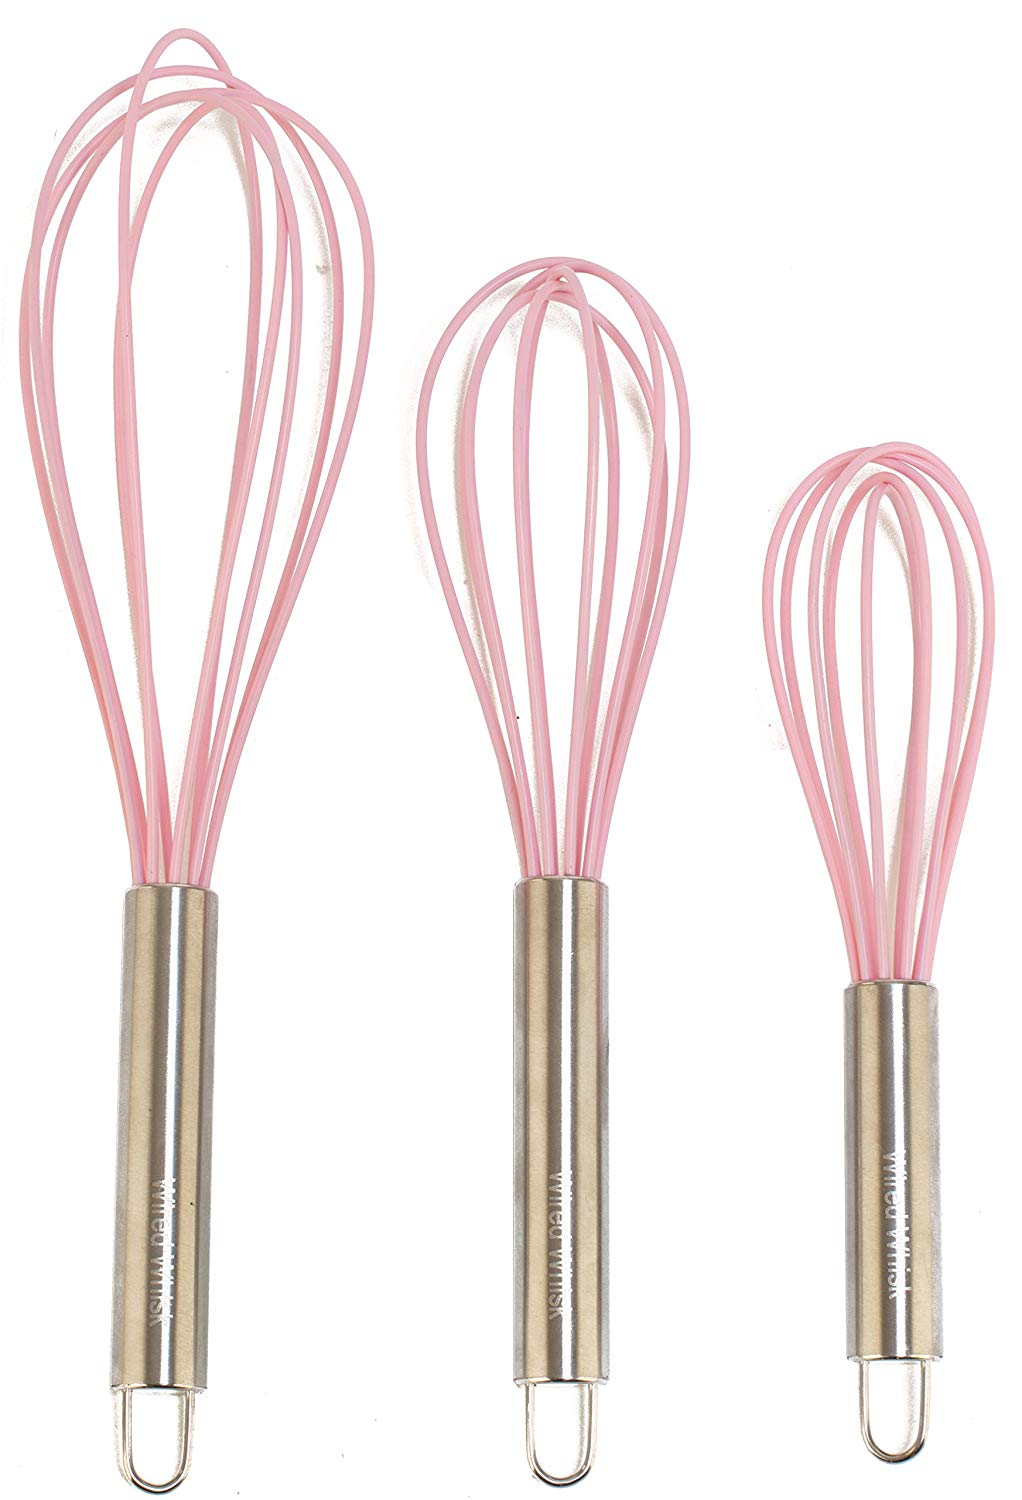 Wired Silicone Anti-Scratching Whisks, 3-Piece